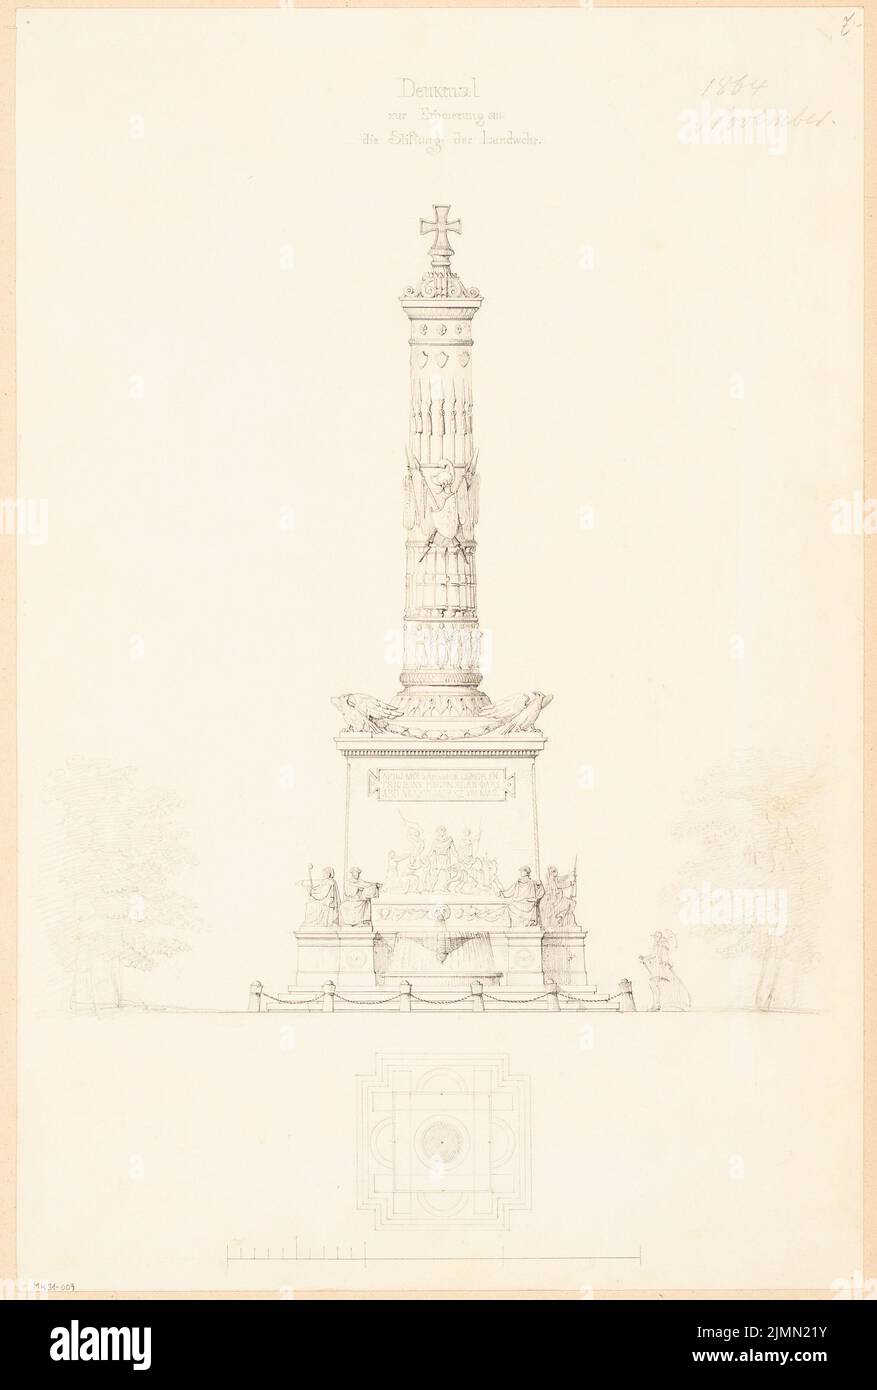 Unknown architect, monument to establishing the Landwehr. Monthly competition November 1864 (11.1864): floor plan, torture; Scale bar. Pencil and ink on paper, 49.4 x 33.3 cm (including scan edges) Stock Photo